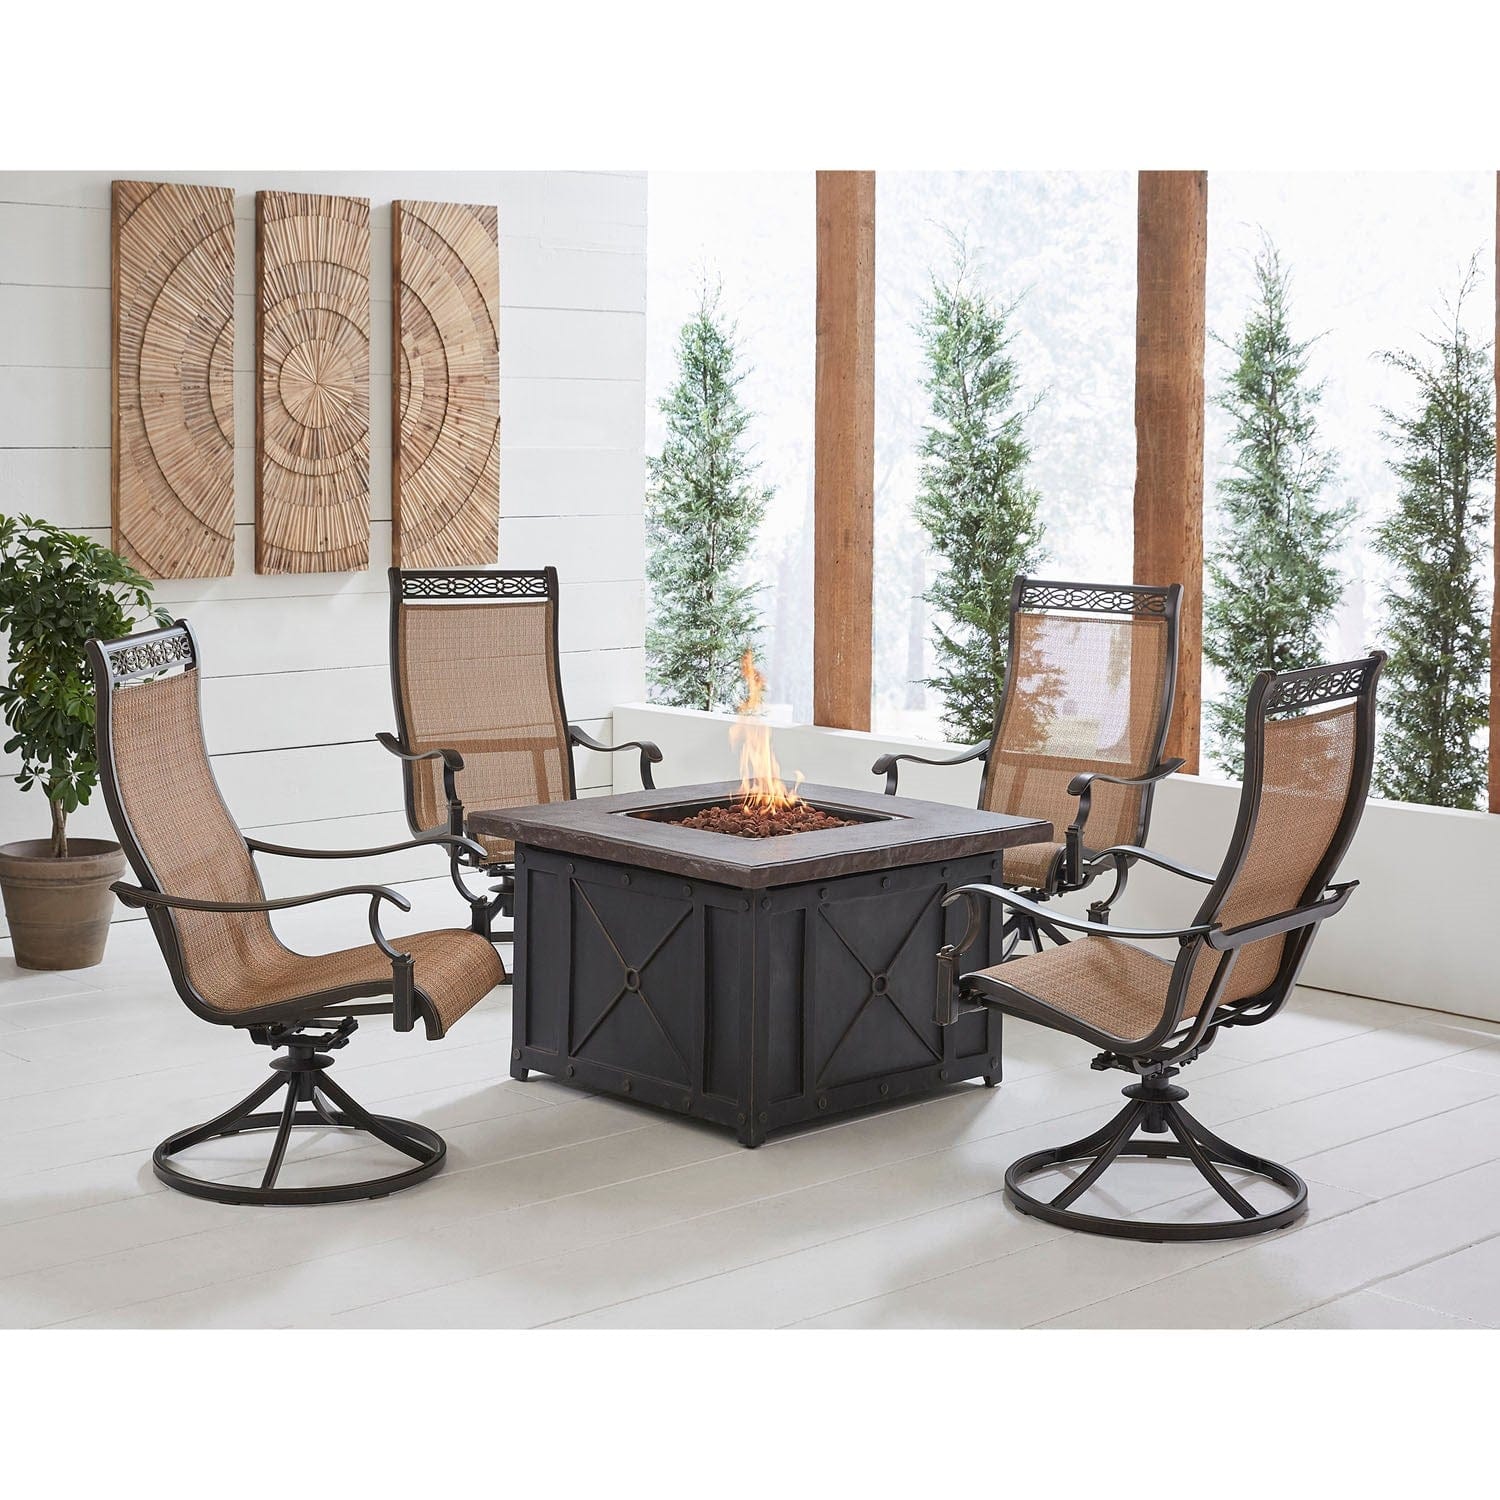 Hanover Fire Table Dining Set Hanover - Monaco 5-Piece Fire Pit Chat Set with 4 Sling Swivel Rockers and a 40,000 BTU Durastone Propane Fire Pit Coffee Table | 40x40 |  MON5PCSW4DFP